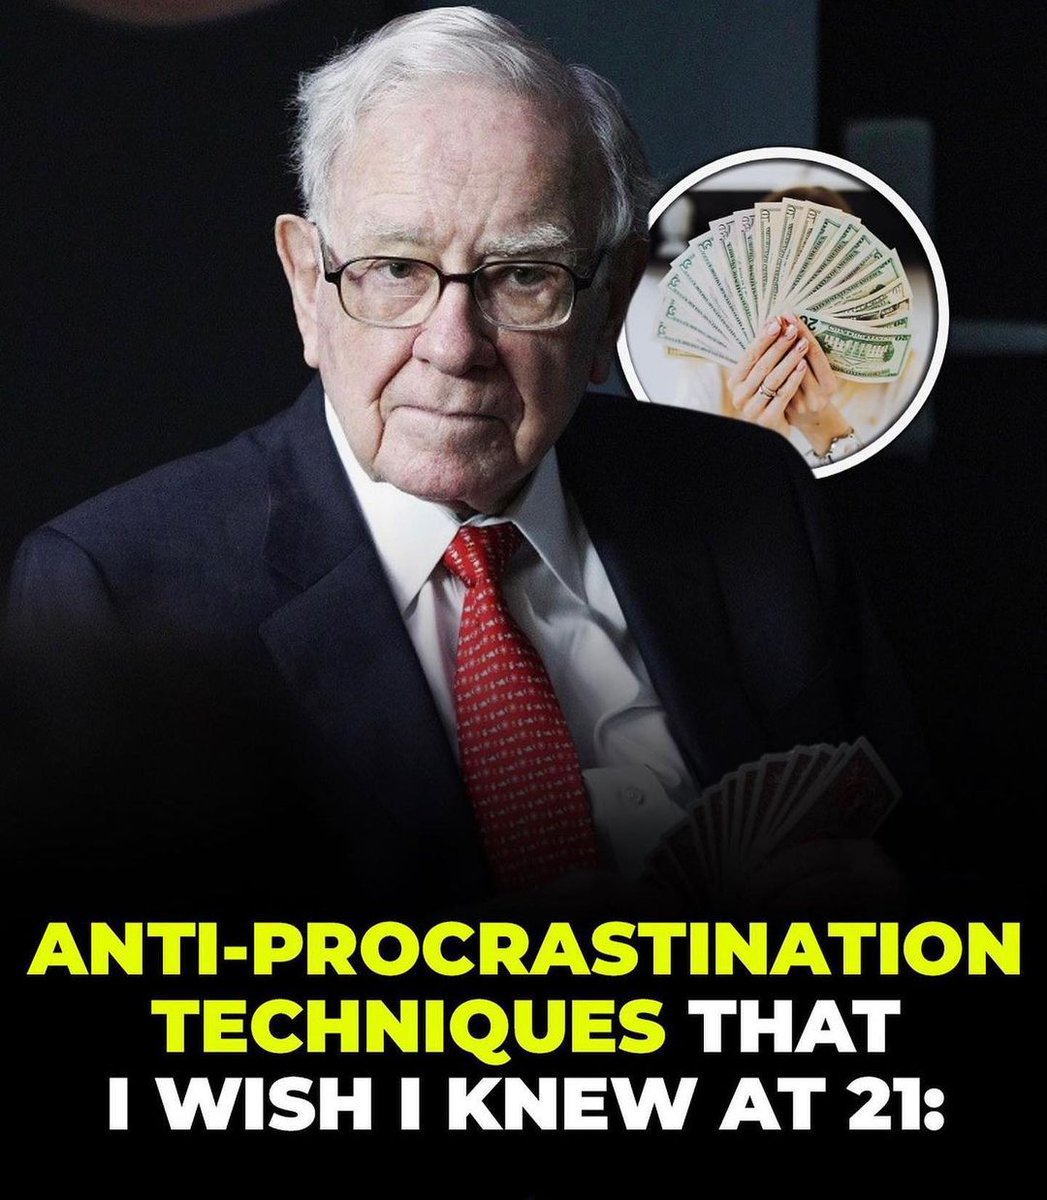 ANTI-PROCRASTINATION TECHNIQUES THAT I WISH I KNEW AT 21: - Thread from ...